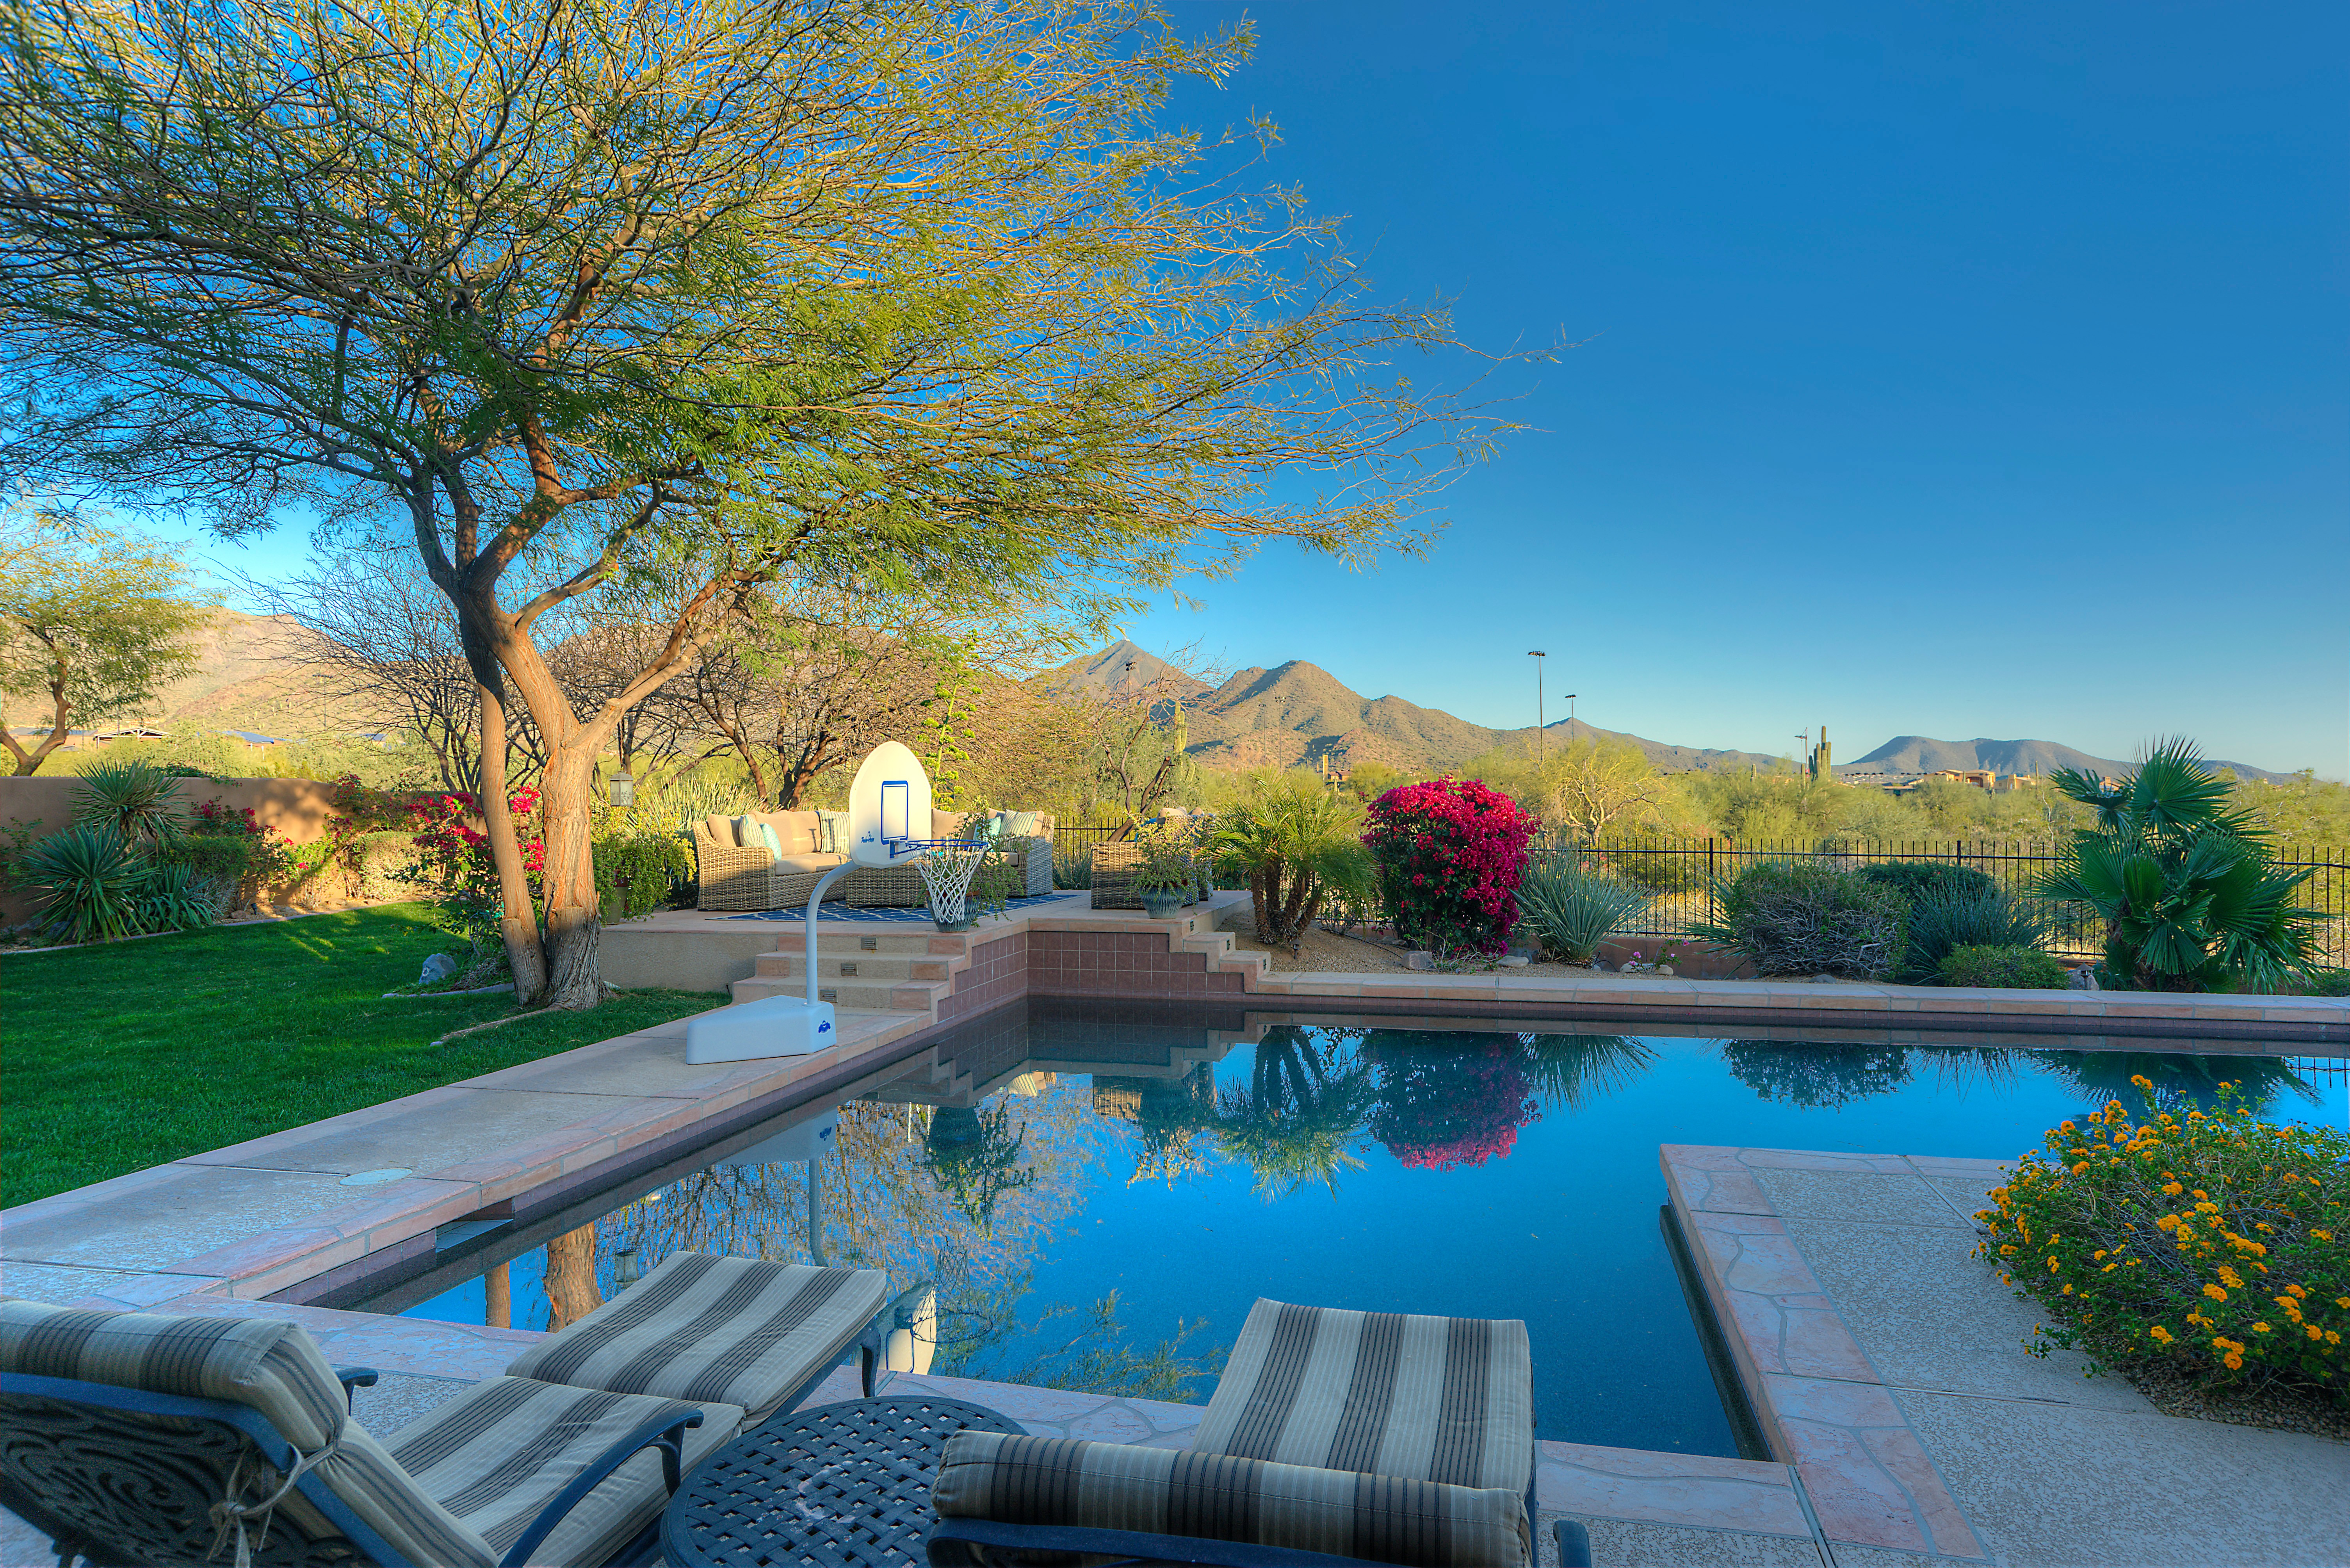 McDowell Mountain views at this Scottsdale home for sale in DC Ranch located at 19829 N 97th Pl Scottsdale, AZ 85255 listed by Don Matheson at The Matheson Team